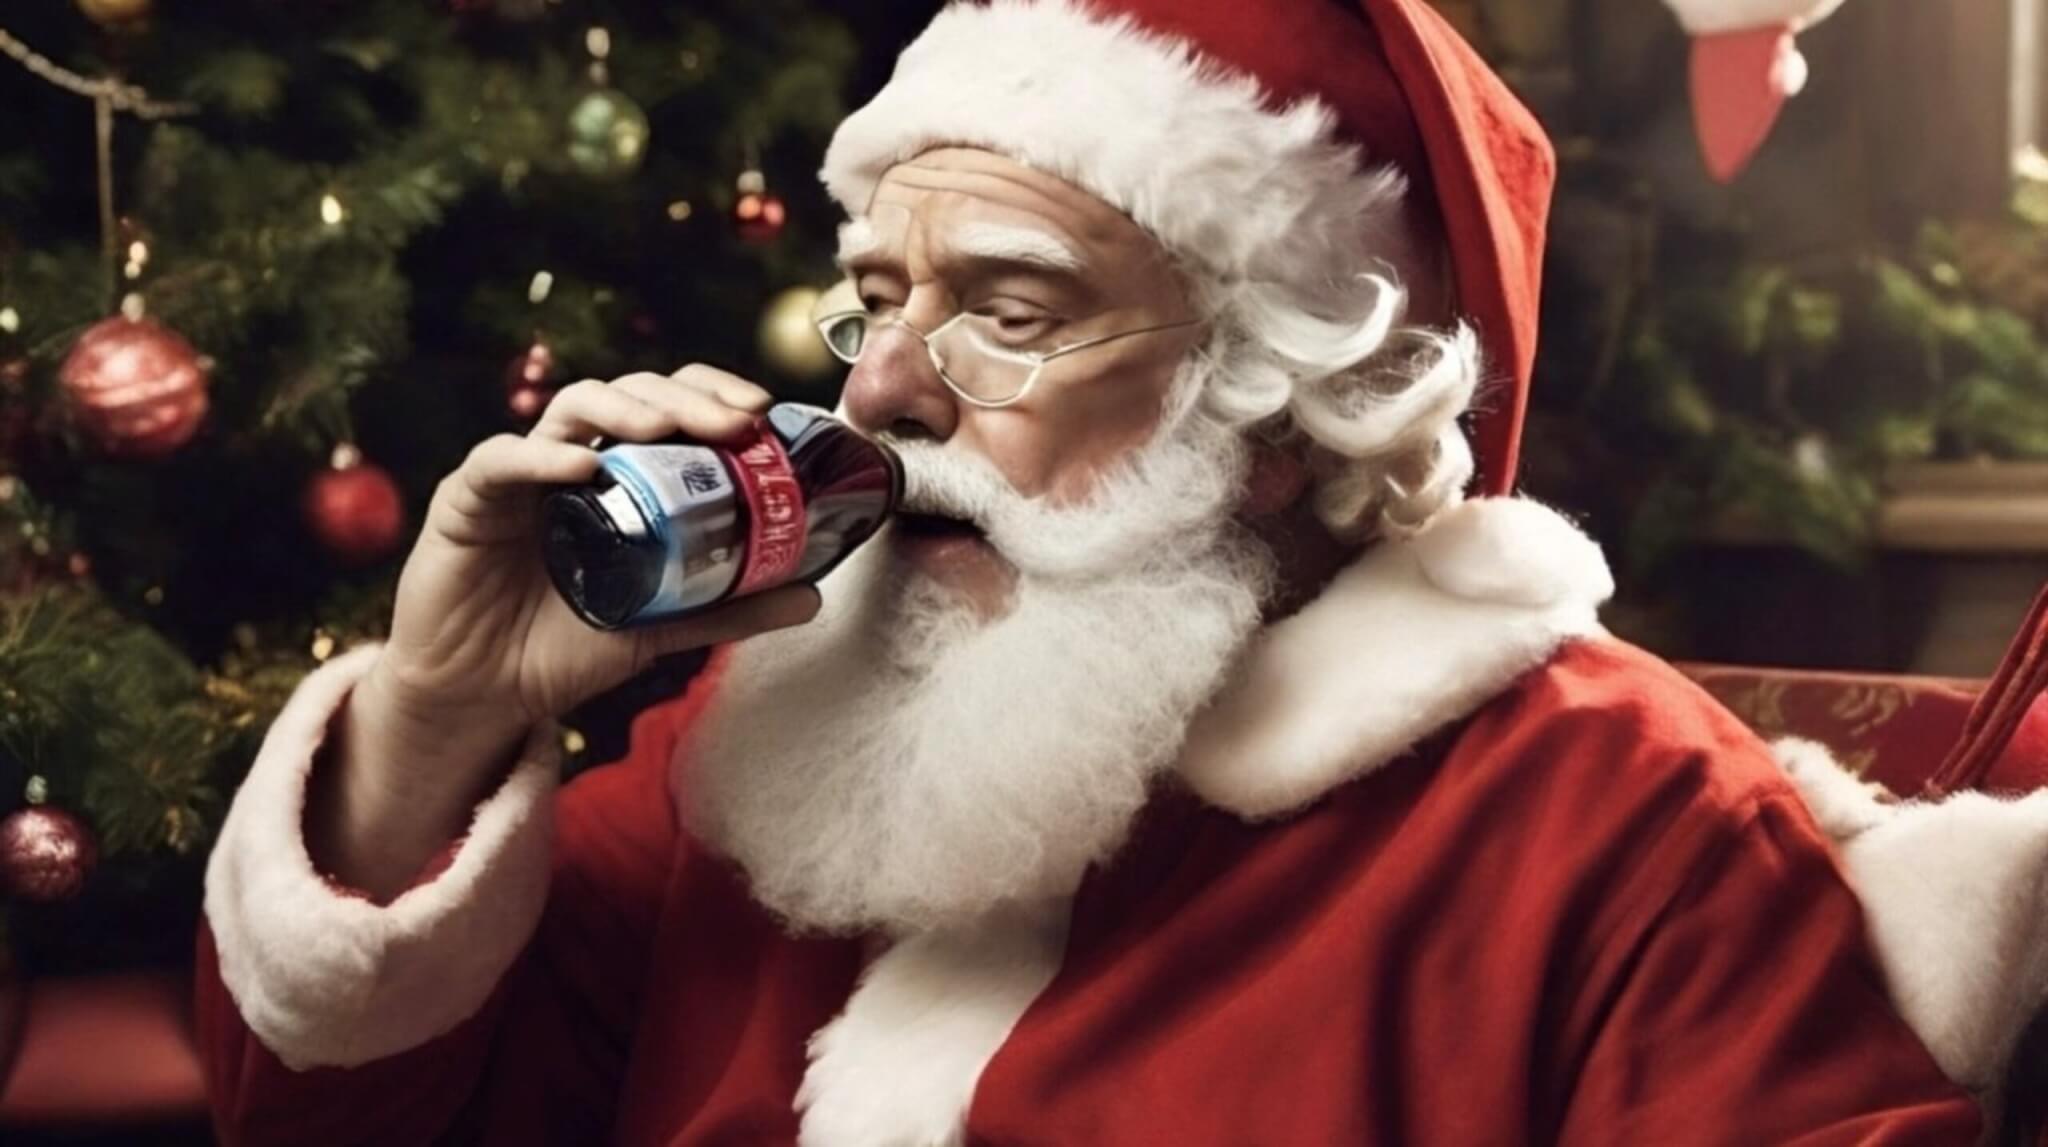 Image of Santa Claus drinking a bottle of soda